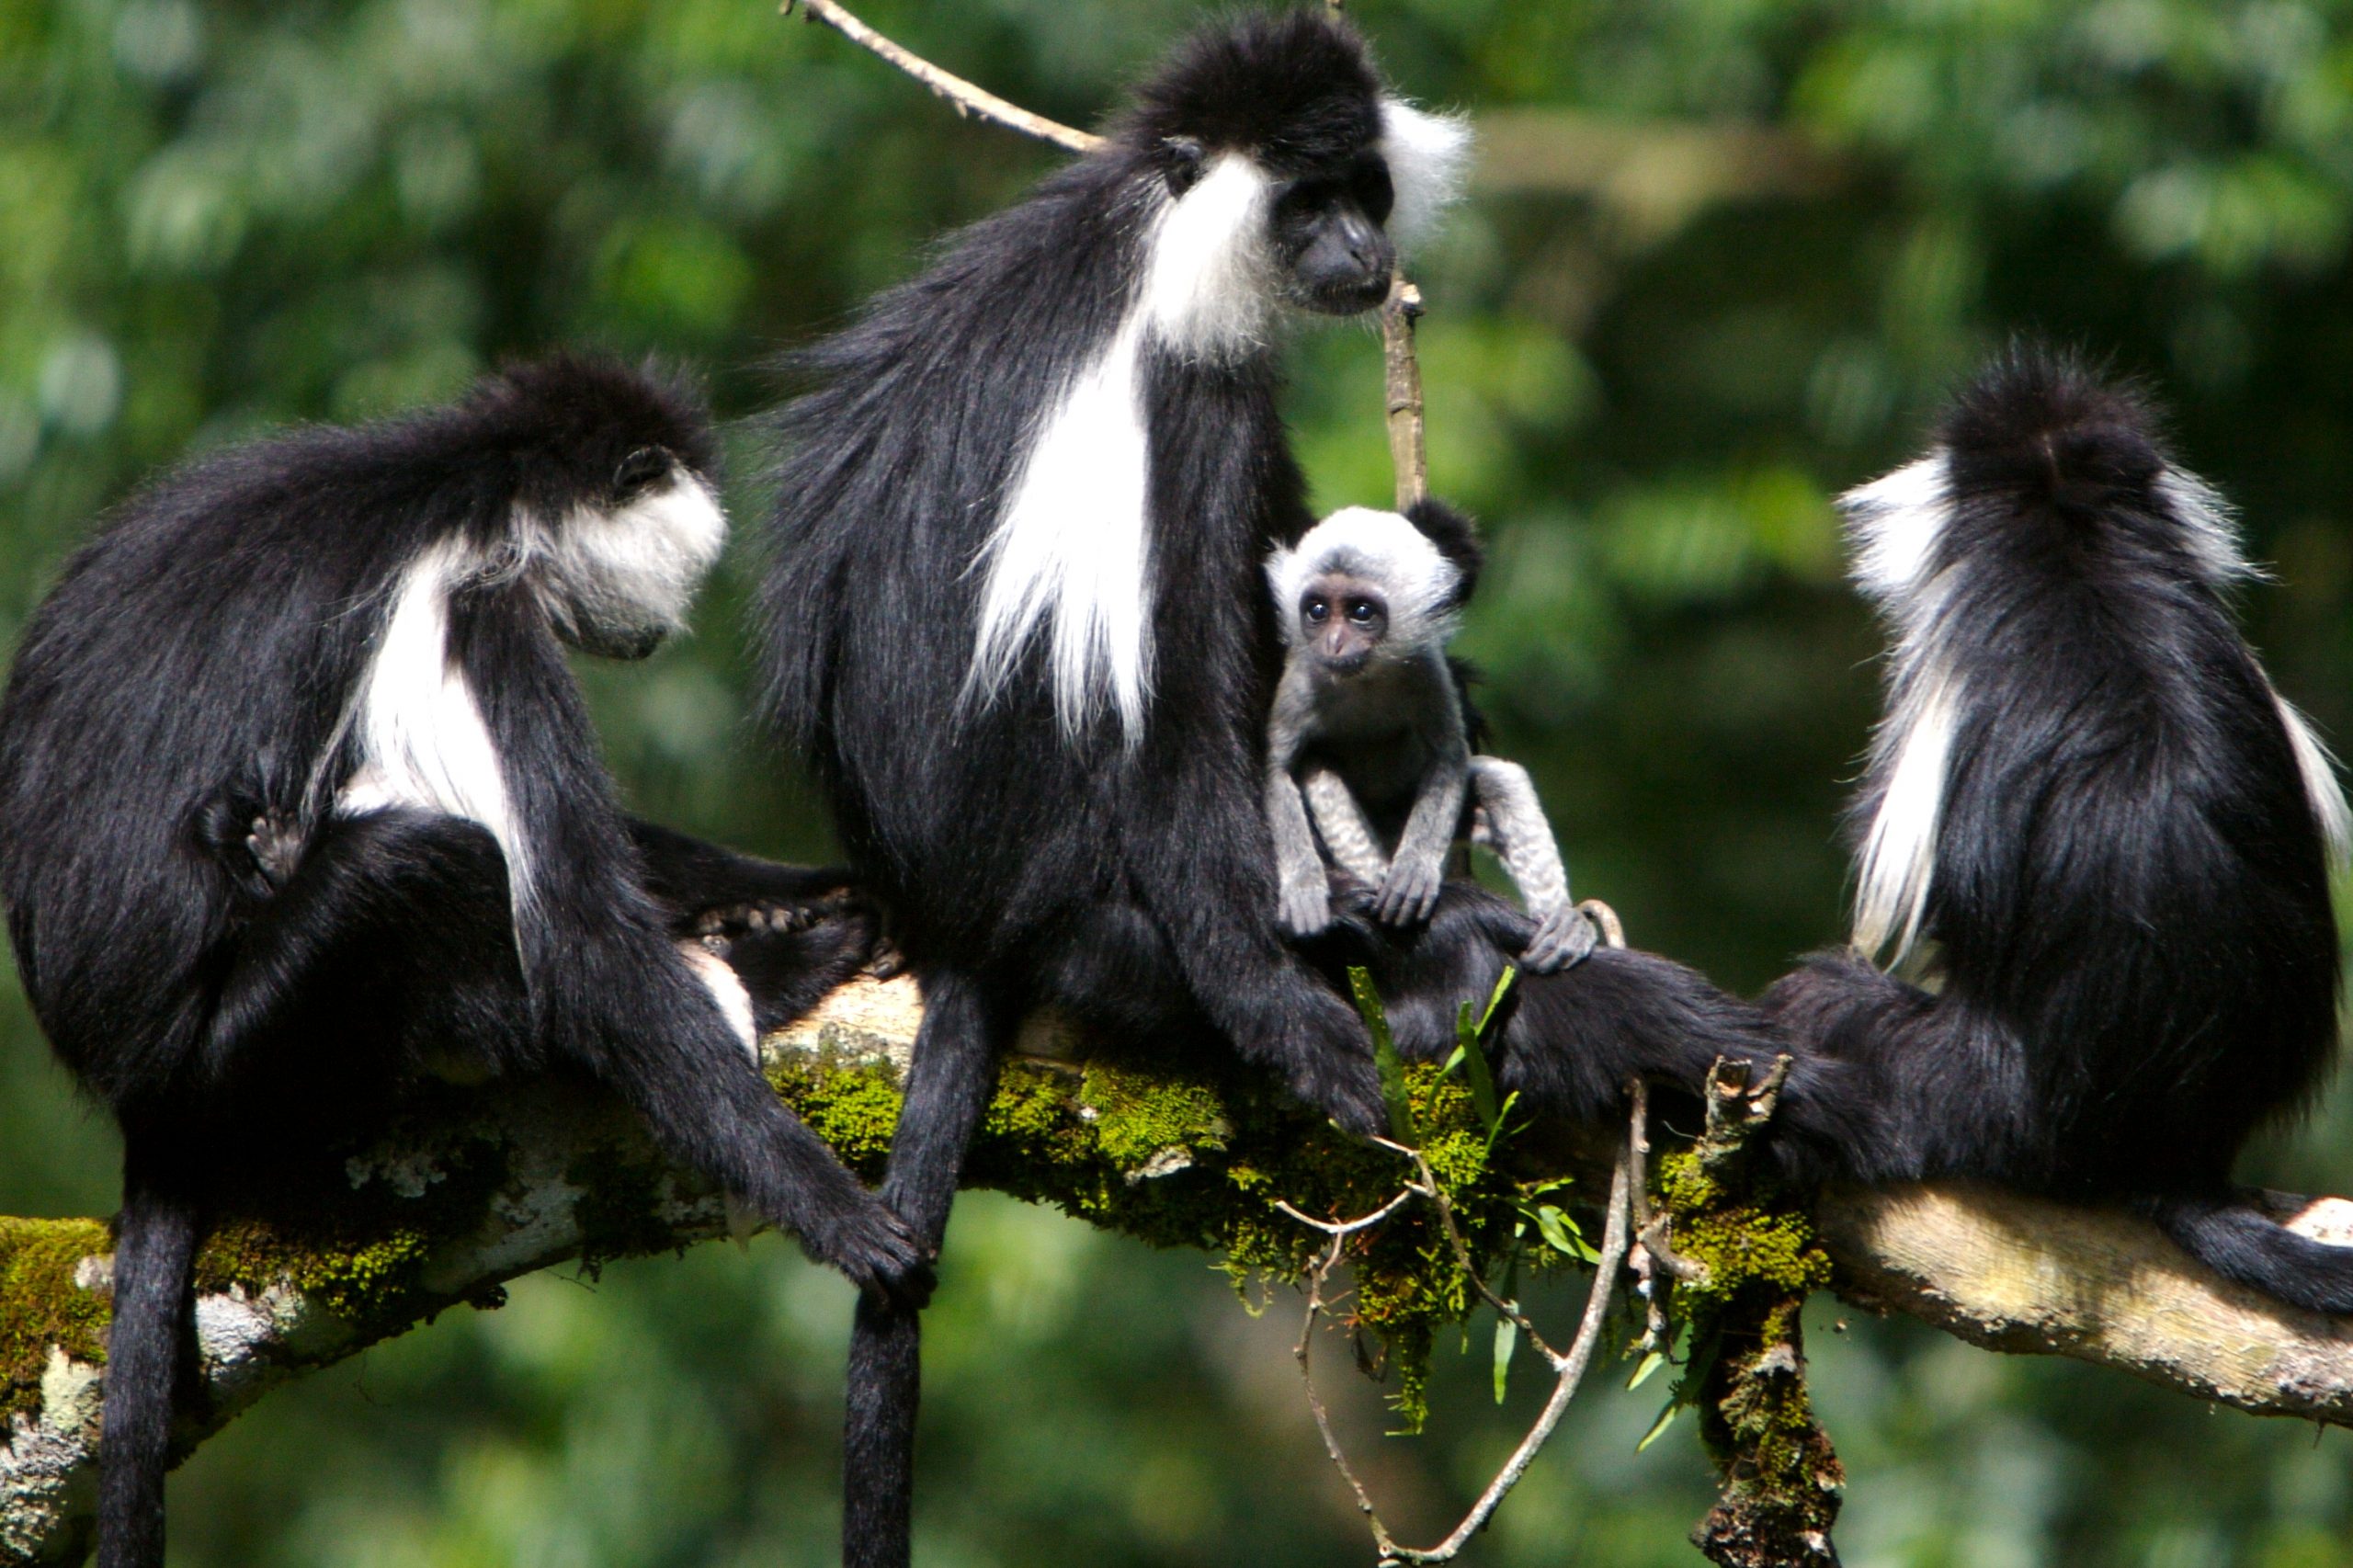 Angolan black and white colobus - a group of adults with young